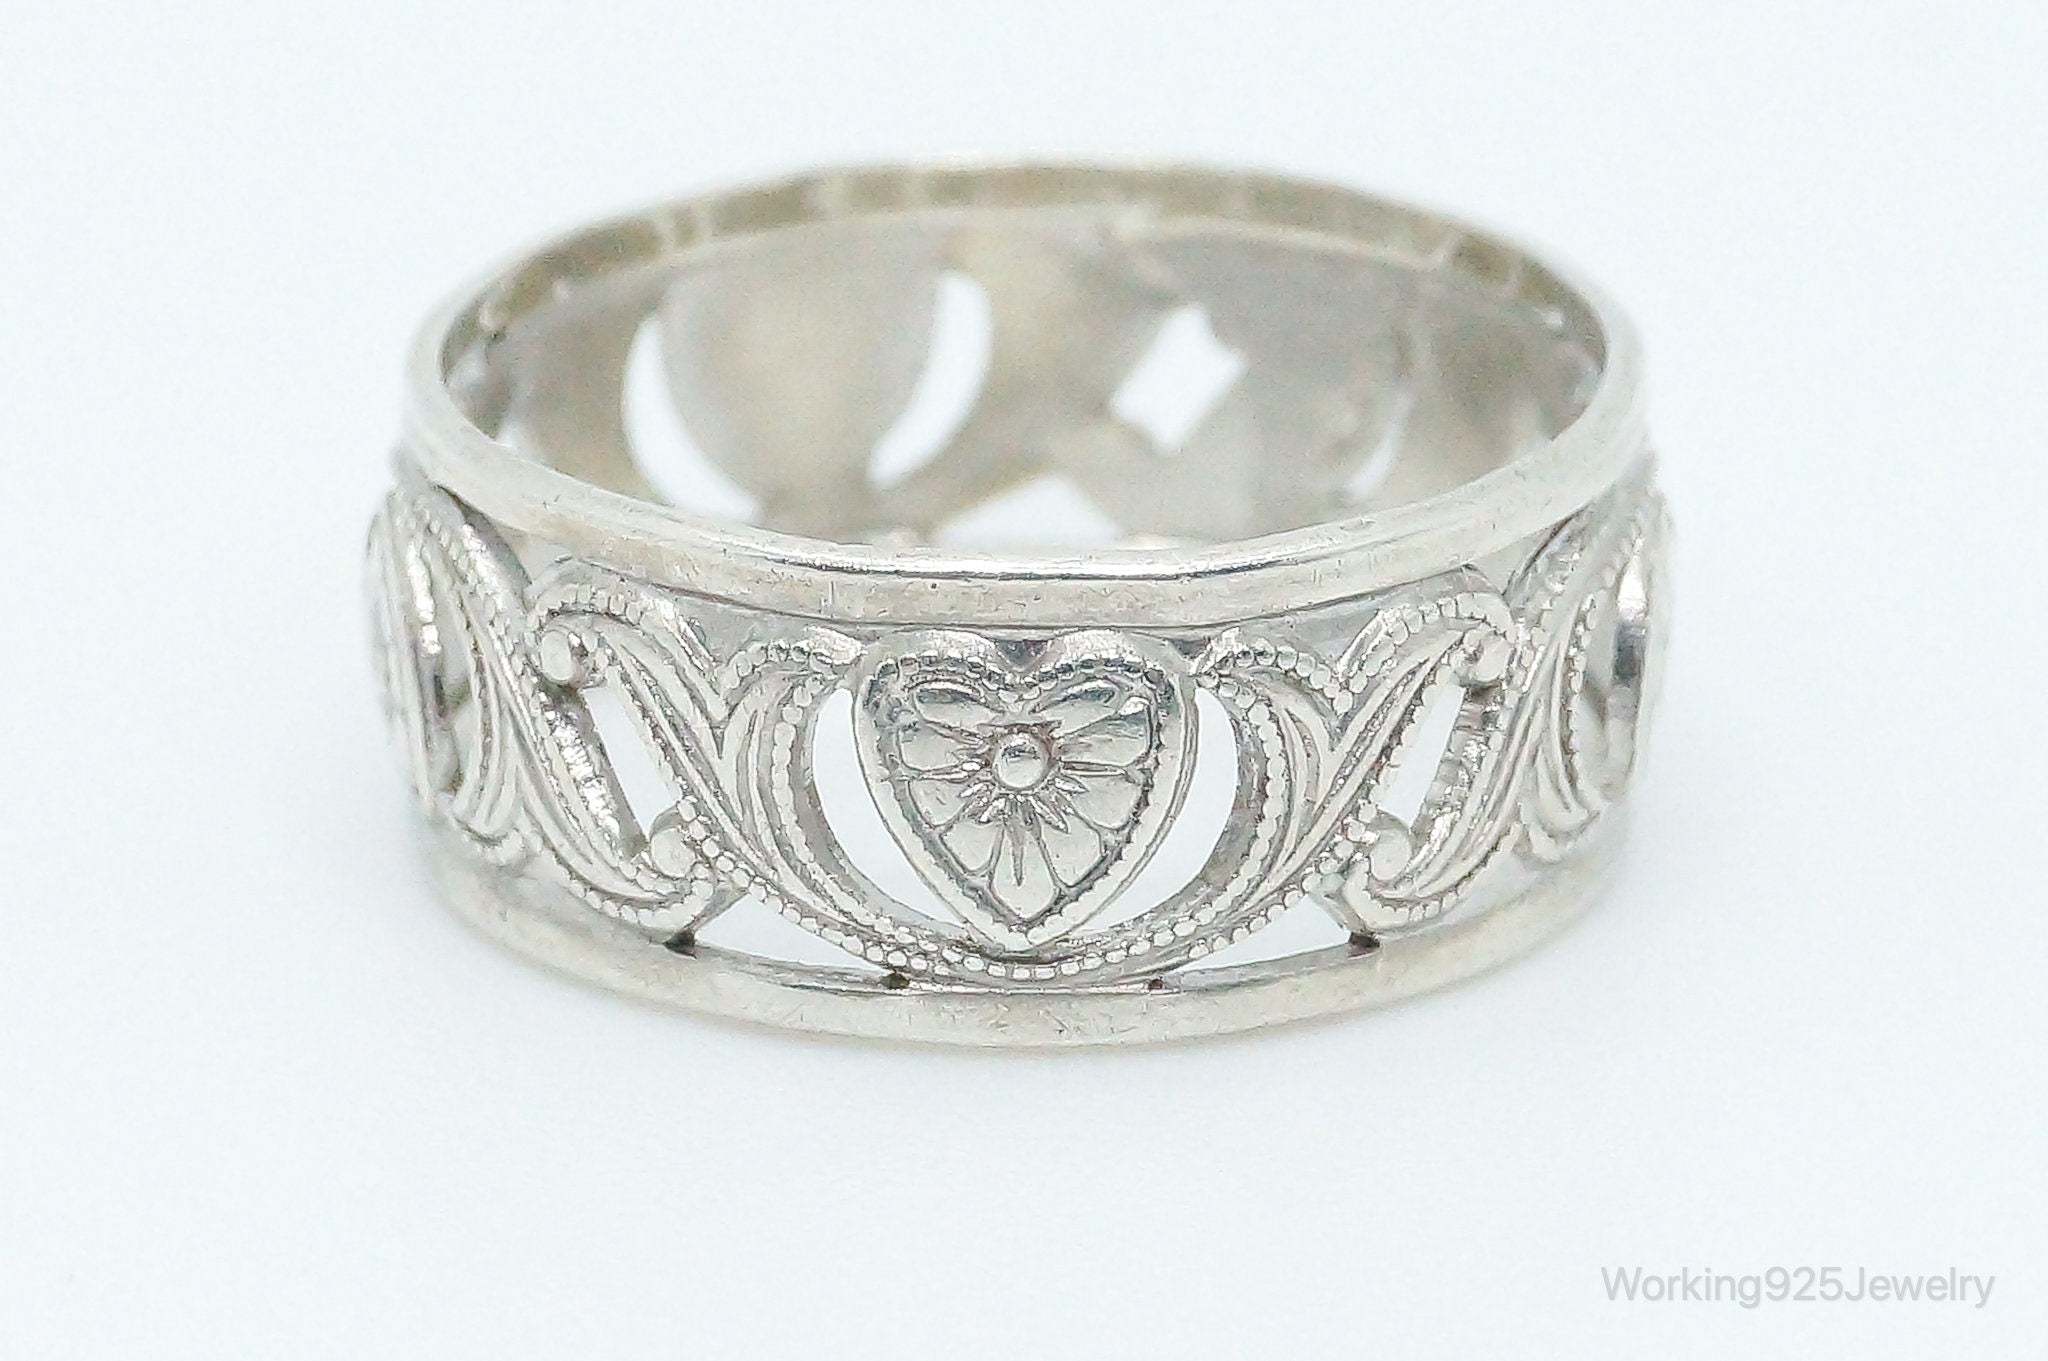 Antique Art Deco Hearts Sterling Silver Band Ring - Size 7.25